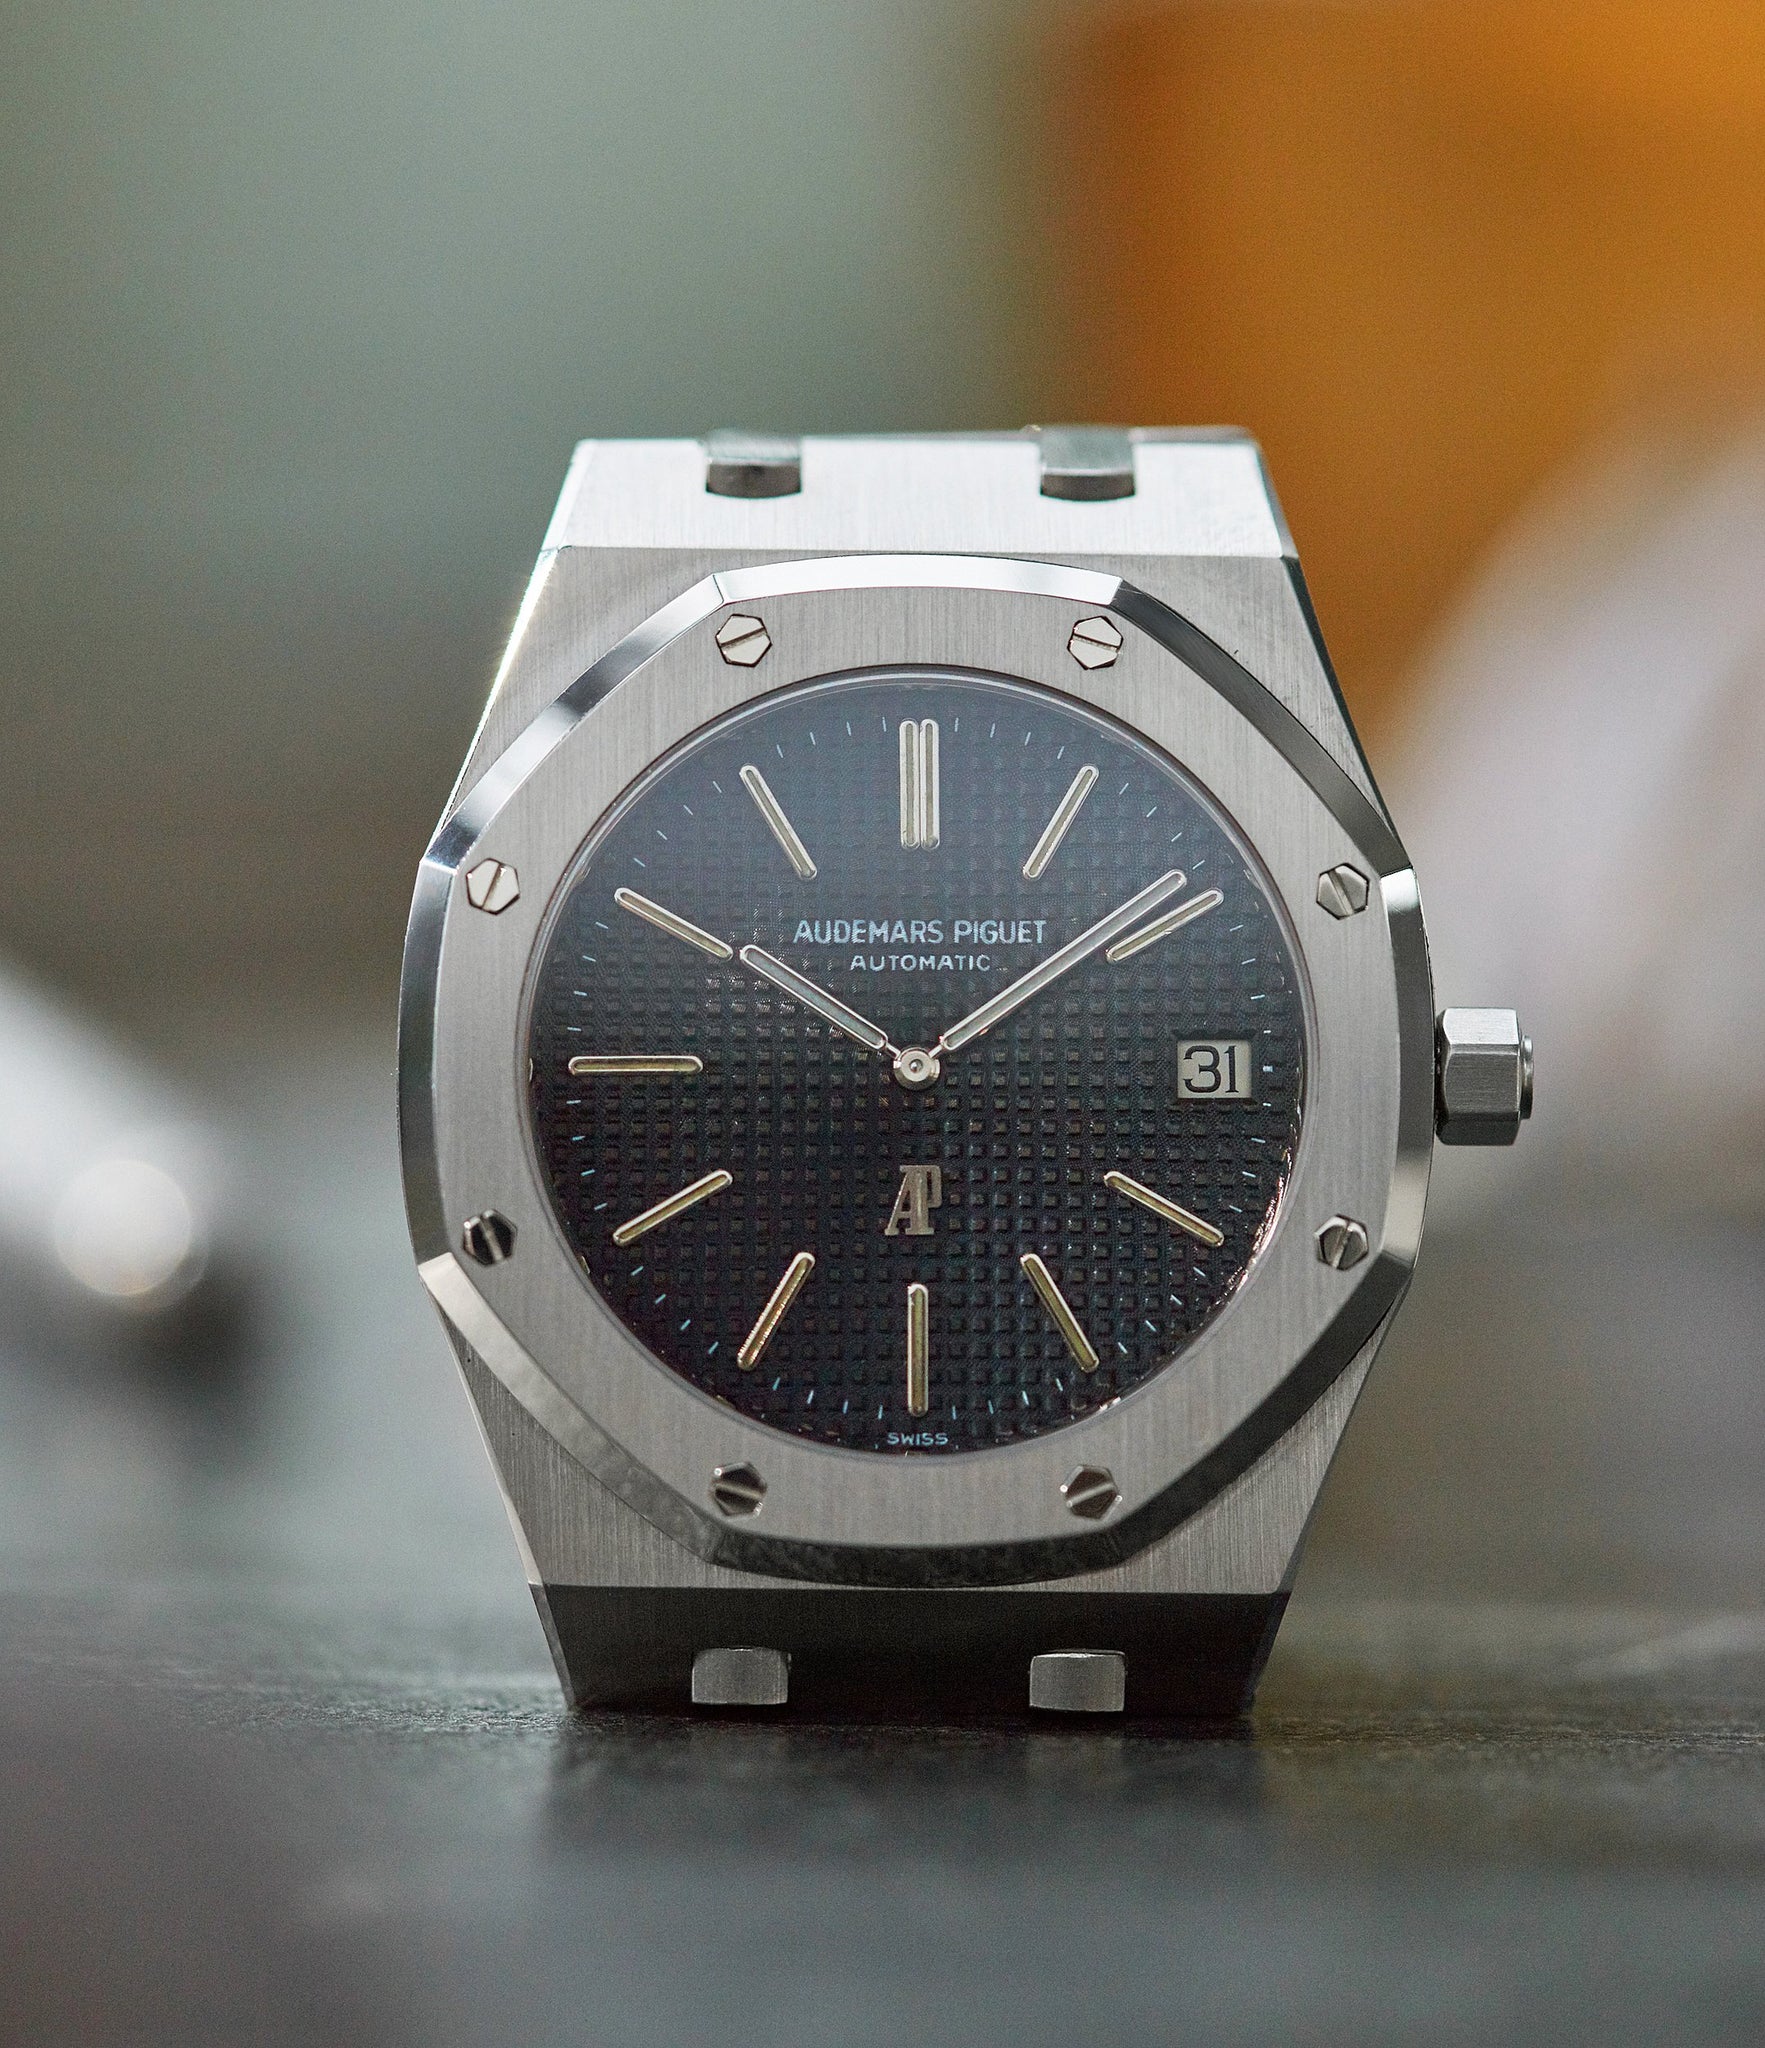 shop pre-owned Audemars Piguet Royal Oak early A-series steel 5402A steel sports luxury watch for sale online A Collected Man London UK specialist rare watches